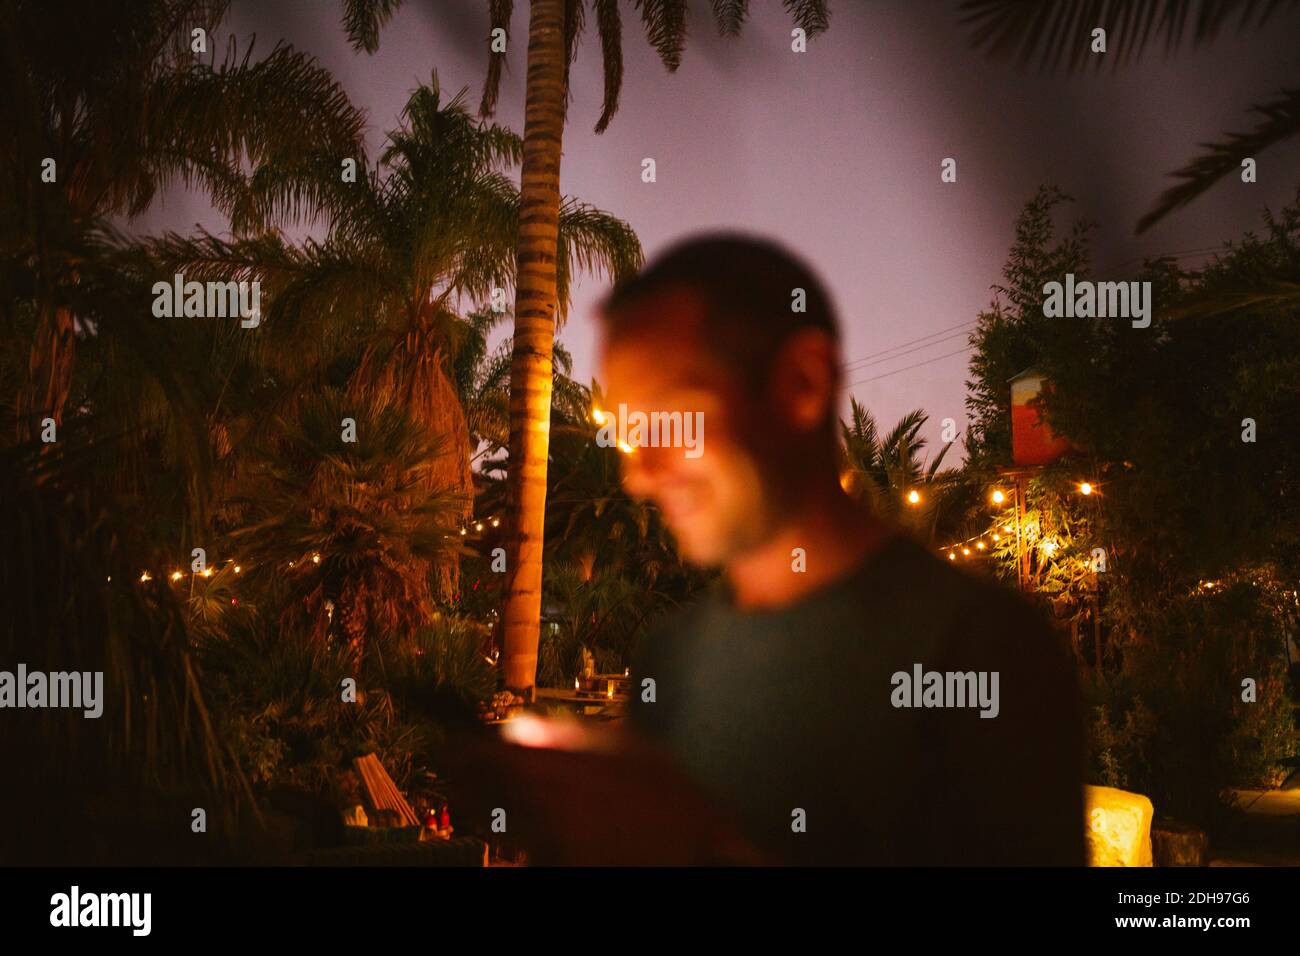 Smiling man using phone against trees during sunset Stock Photo